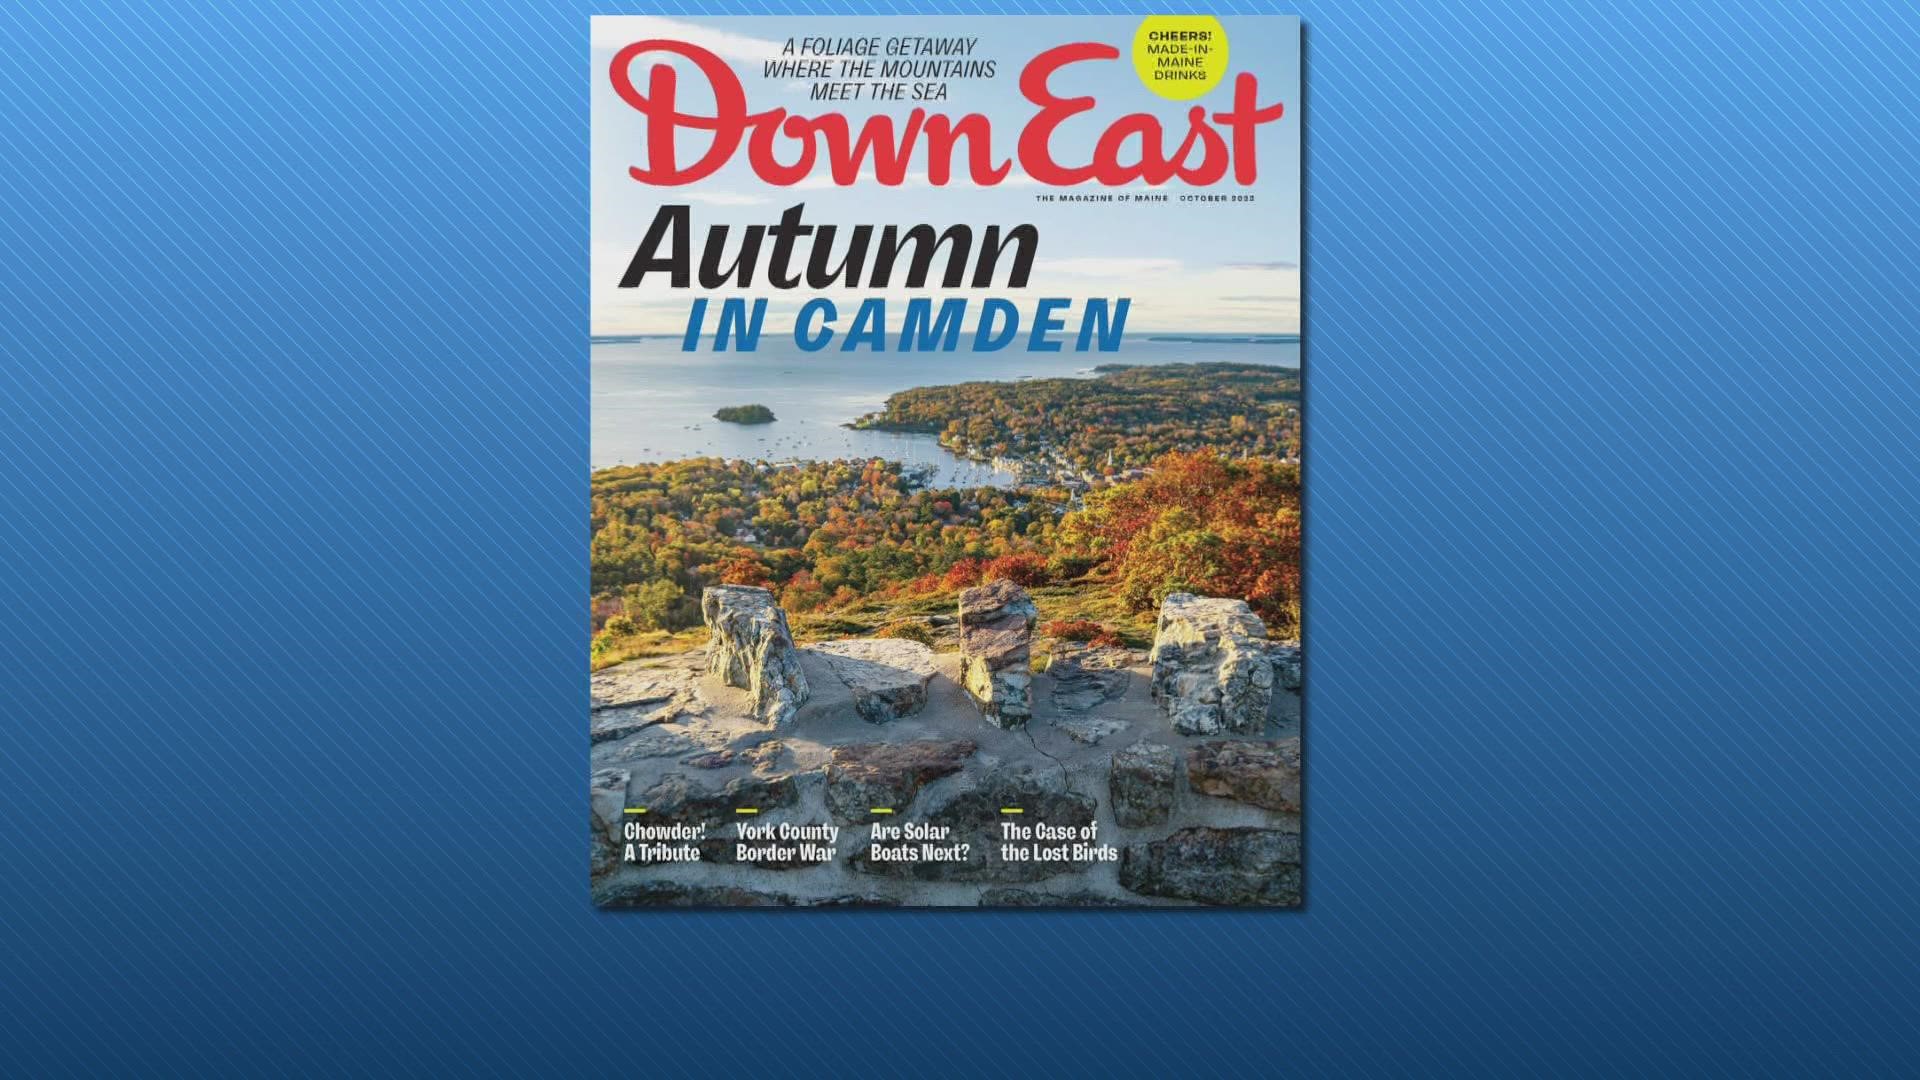 “There is a romance to autumn in the Camden Hills that no place in New England can match”